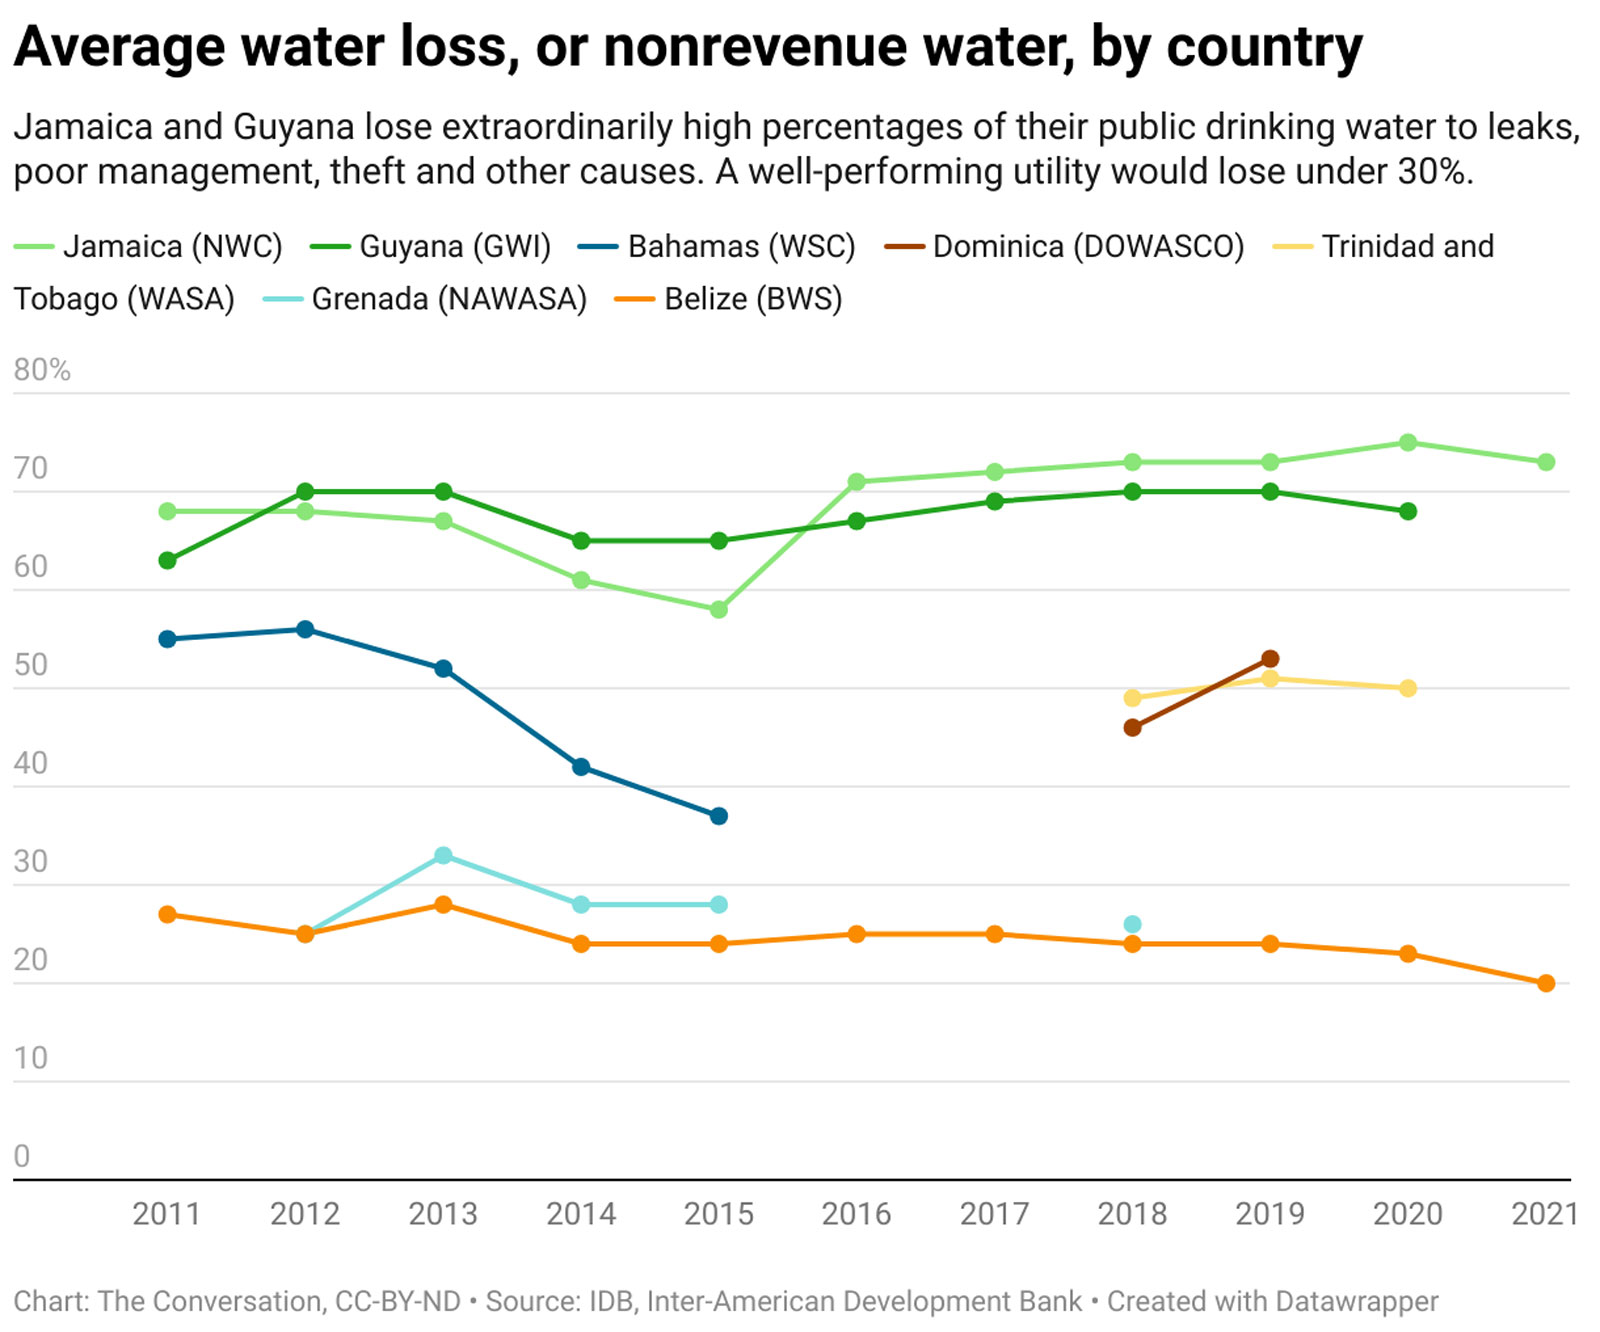 Chart: Average water loss, or nonrevenue water, by country - Jamaica and Guyana lose extraordinarily high percentages of their public drinking water to leaks, poor management, theft and other causes. A well-performing utility would lose under 30%.